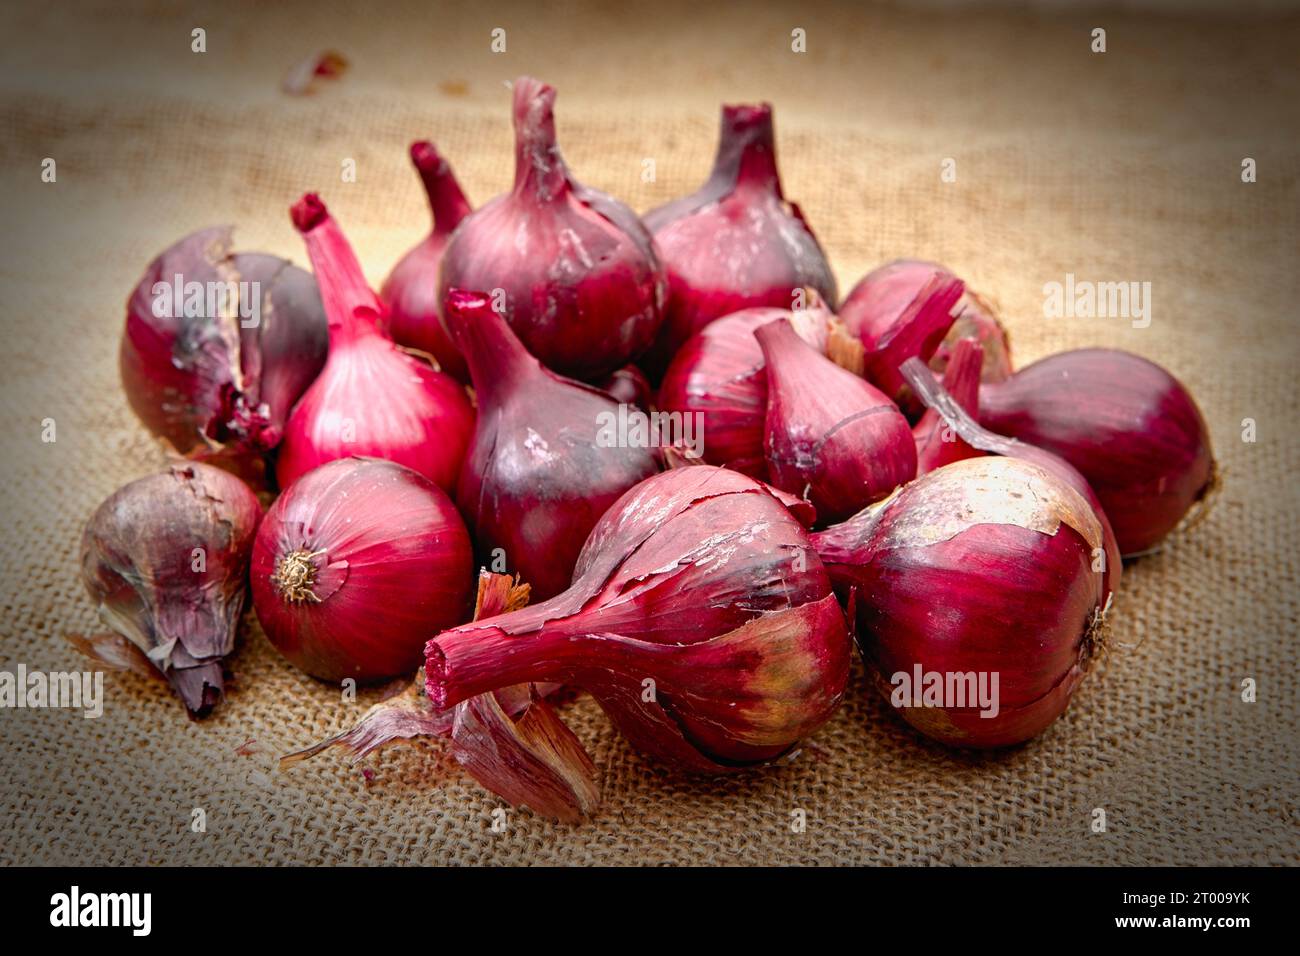 Premium Photo  Fresh red onions in bag on wooden